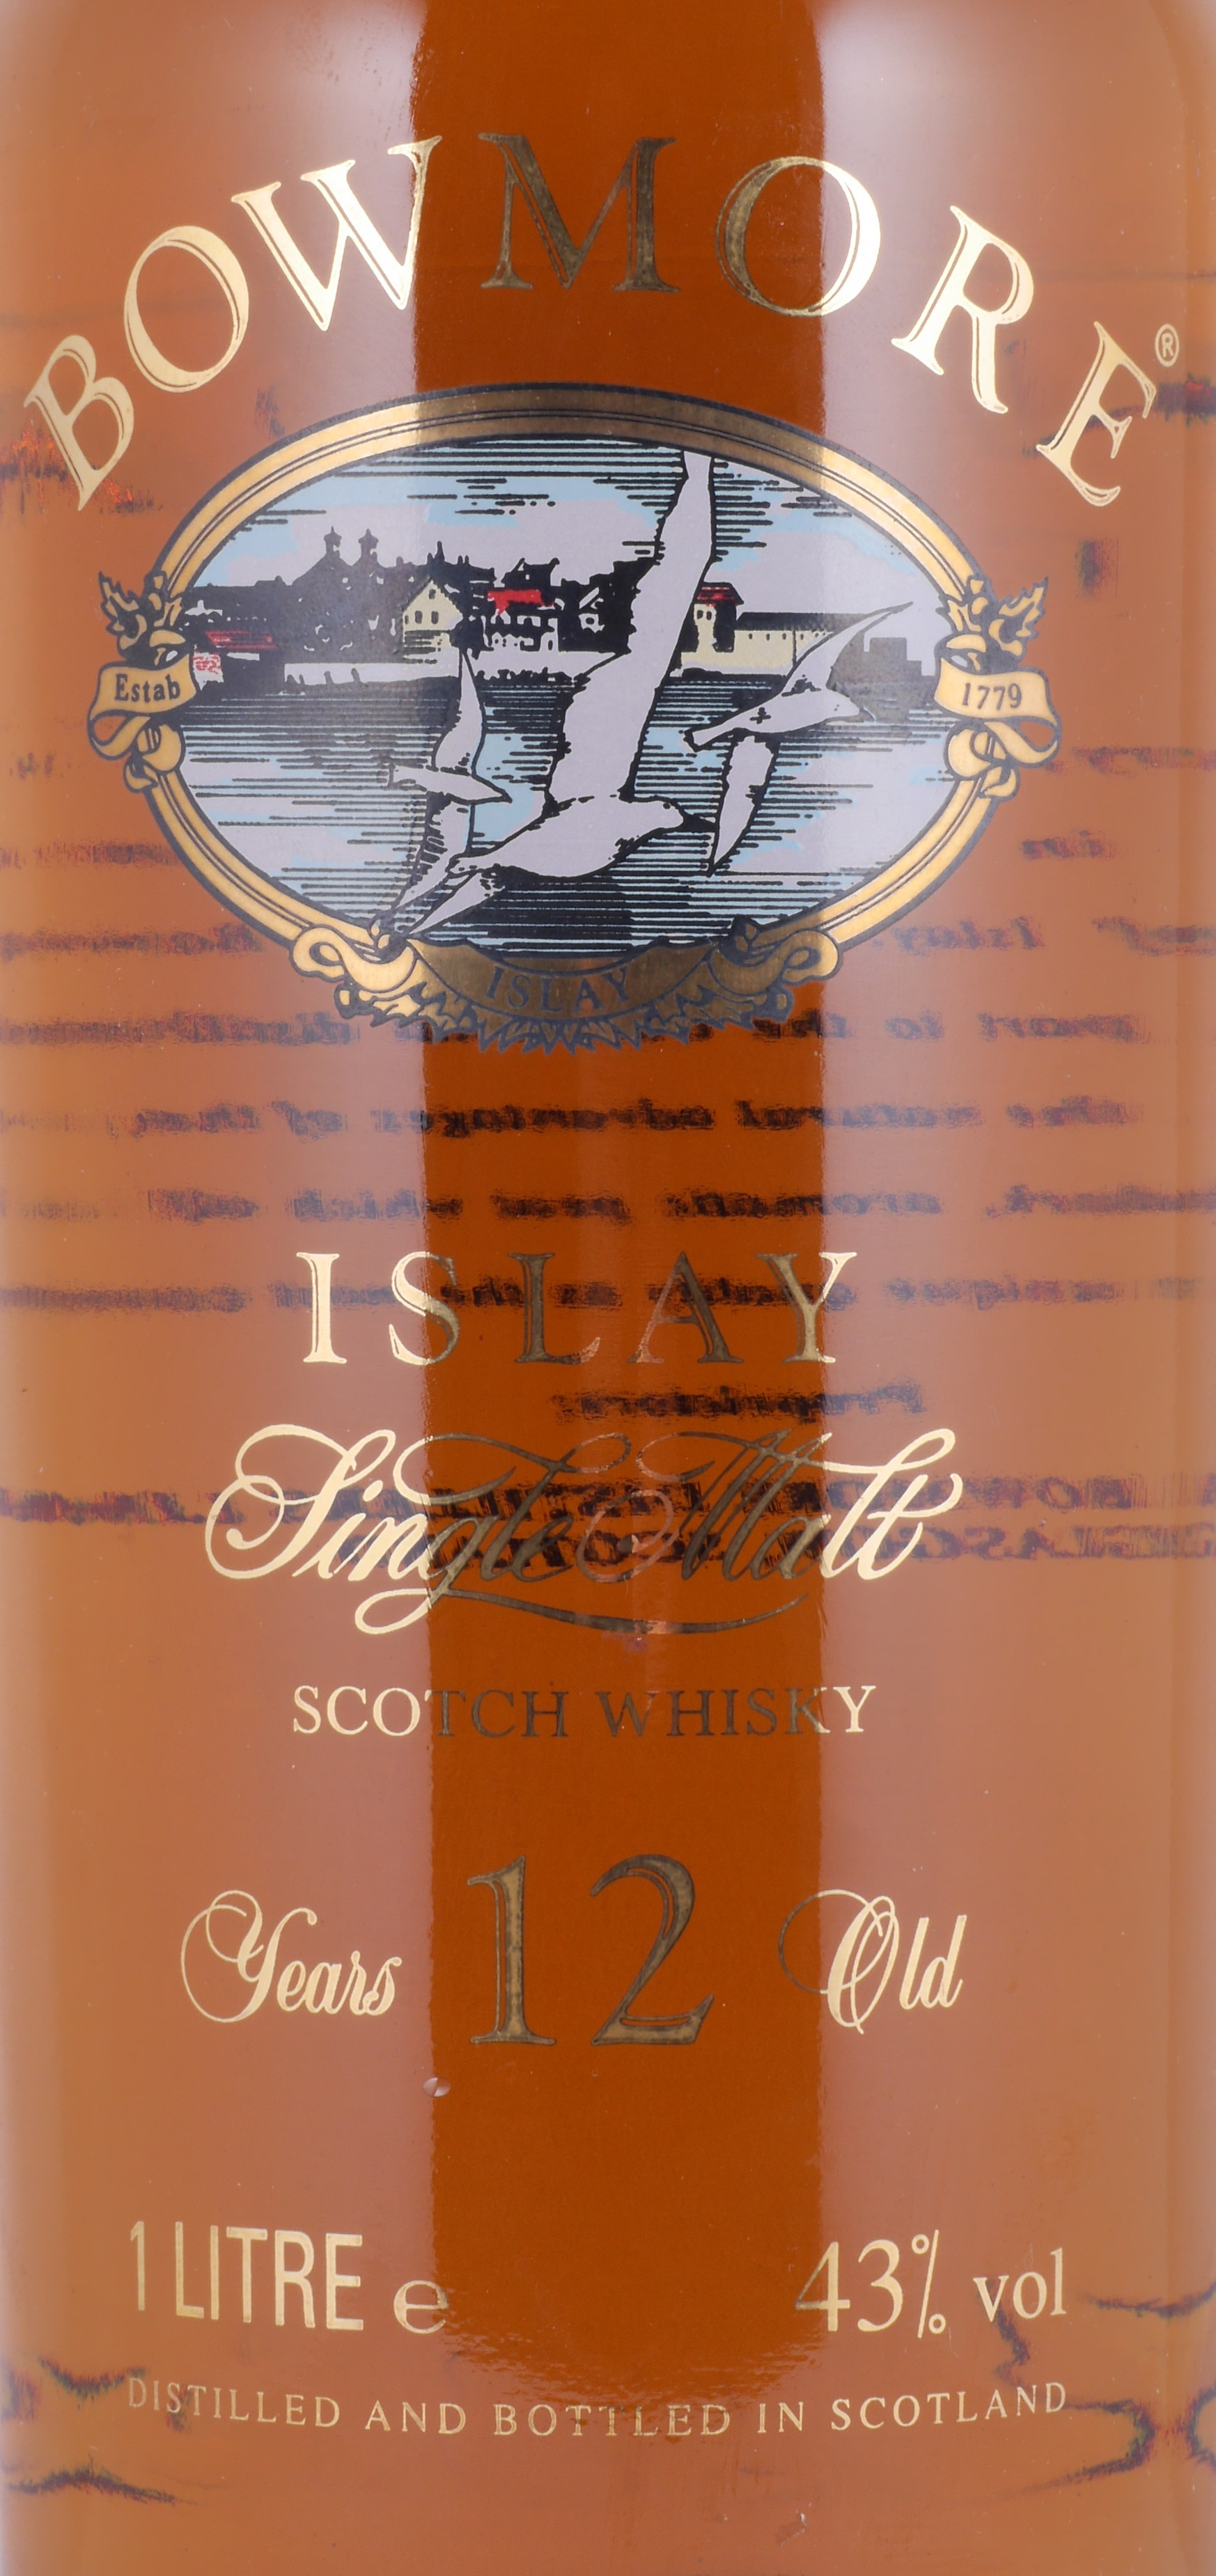 Buy Bowmore 12 Years-old Islay Single Malt Scotch Whisky Glass Printed  Label with 3 Icons 43.0% ABV at AmCom secure online